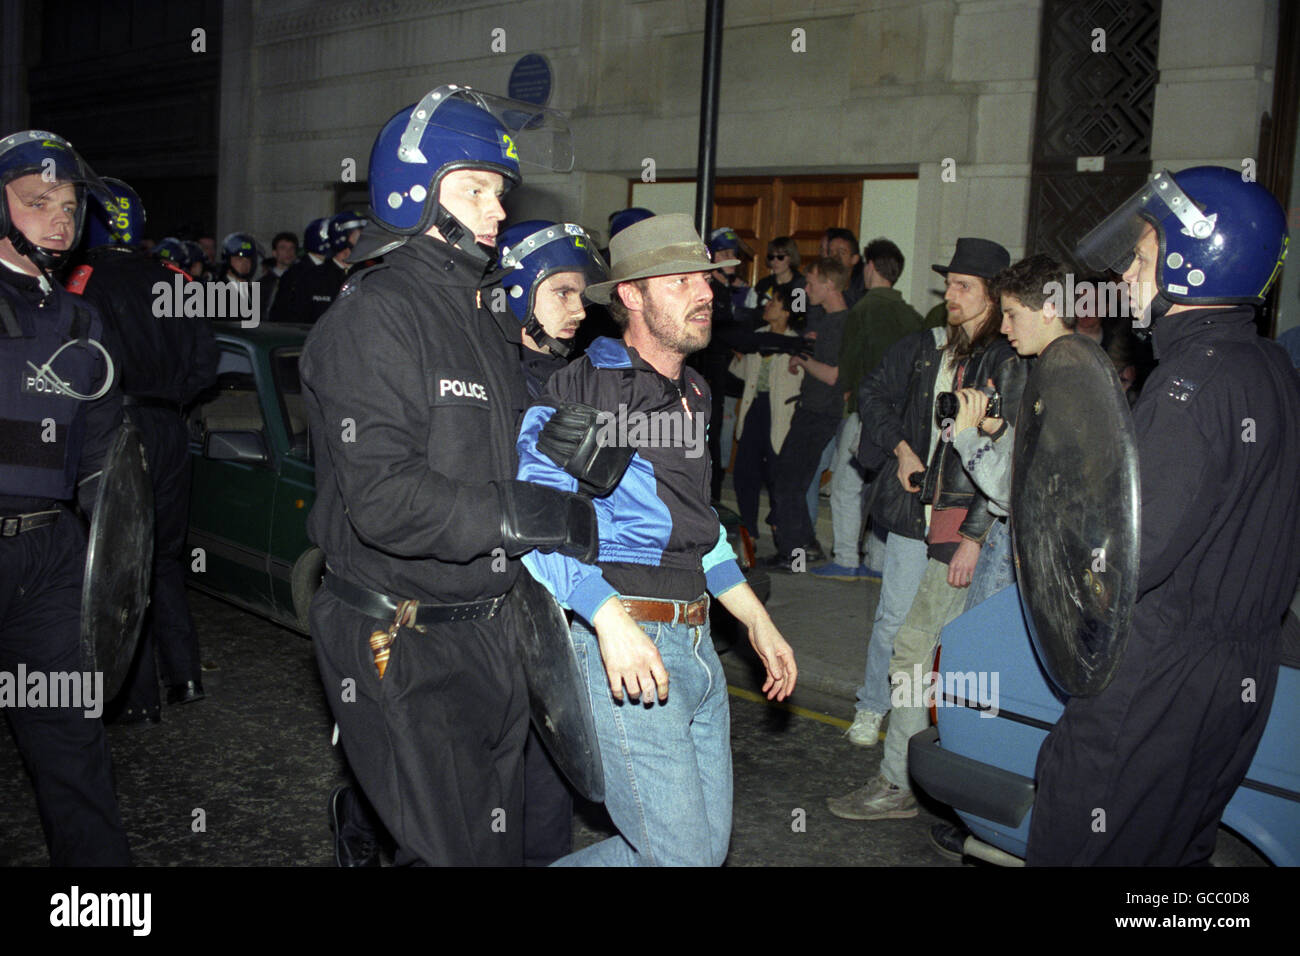 Riot police arrest a man during the riots in central London. The Anti-Poll Tax protests in central London would turn into some of the worst rioting seen in the capital for many years. Stock Photo